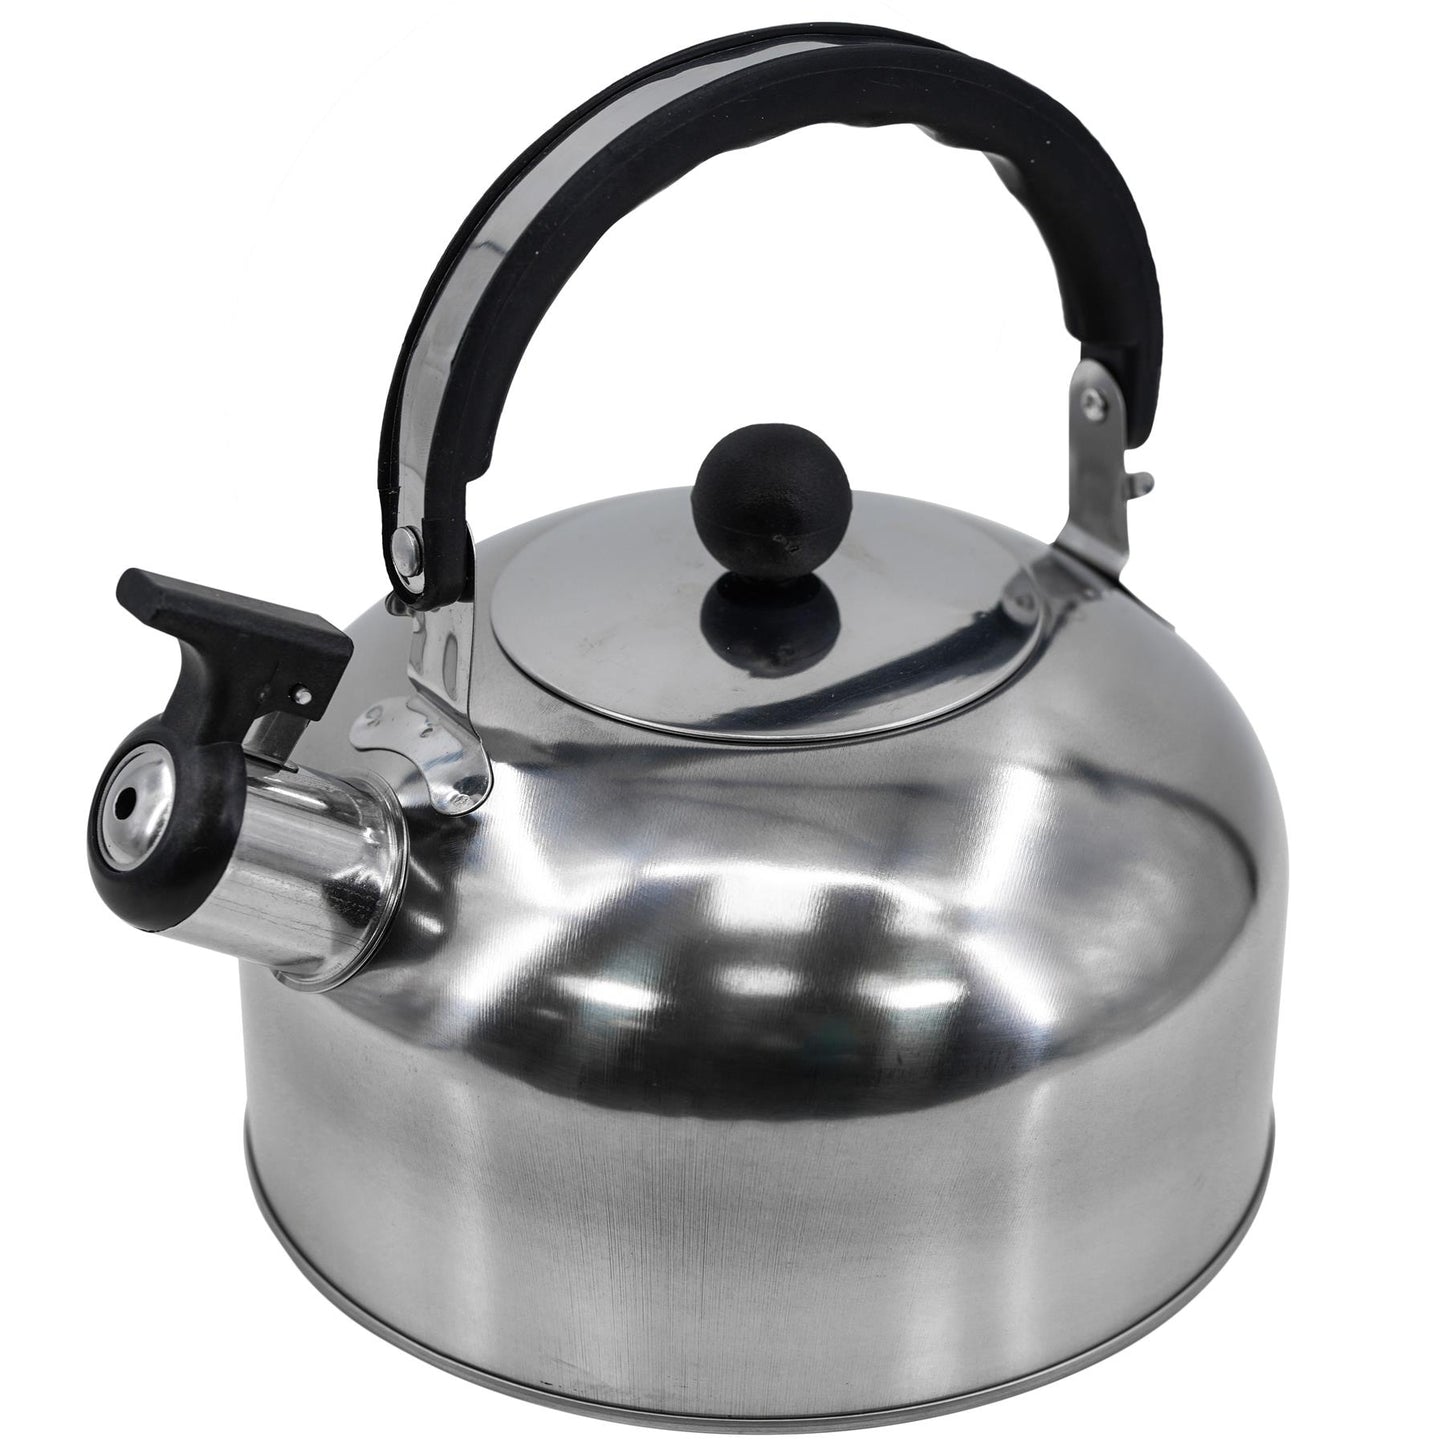 2 L Stainless Steel Whistling Camping Kettle by GEEZY - UKBuyZone